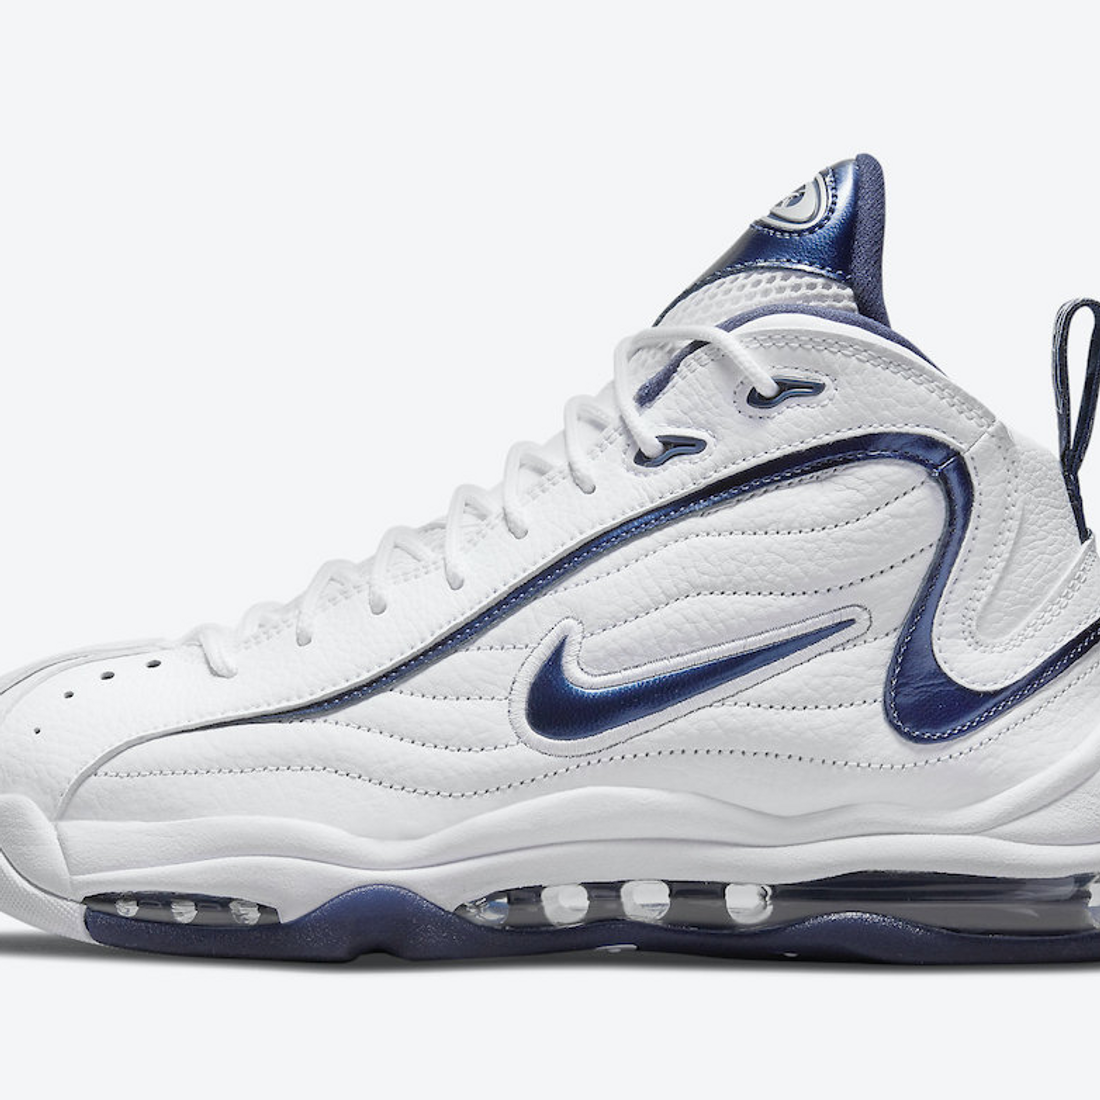 Prepare for the Return of the Nike Air Total Max Uptempo in 2021 ...